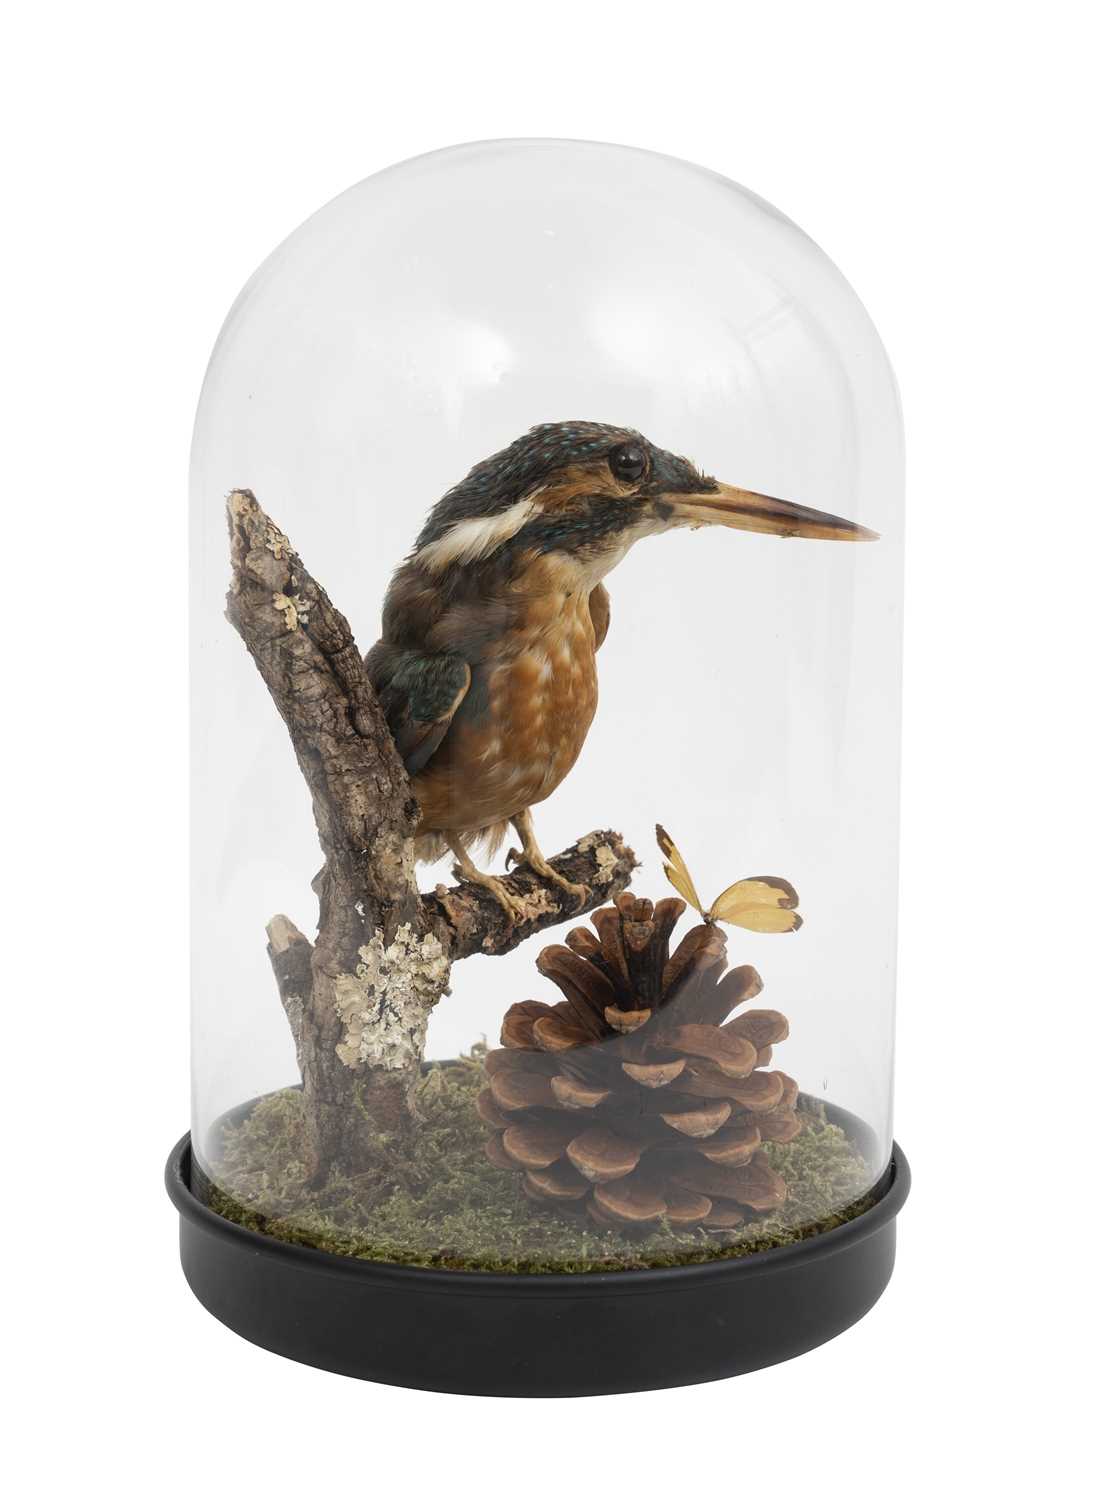 A TAXIDERMY KINGFISHER AND BUTTERFLY IN GLASS DOME - Image 2 of 2